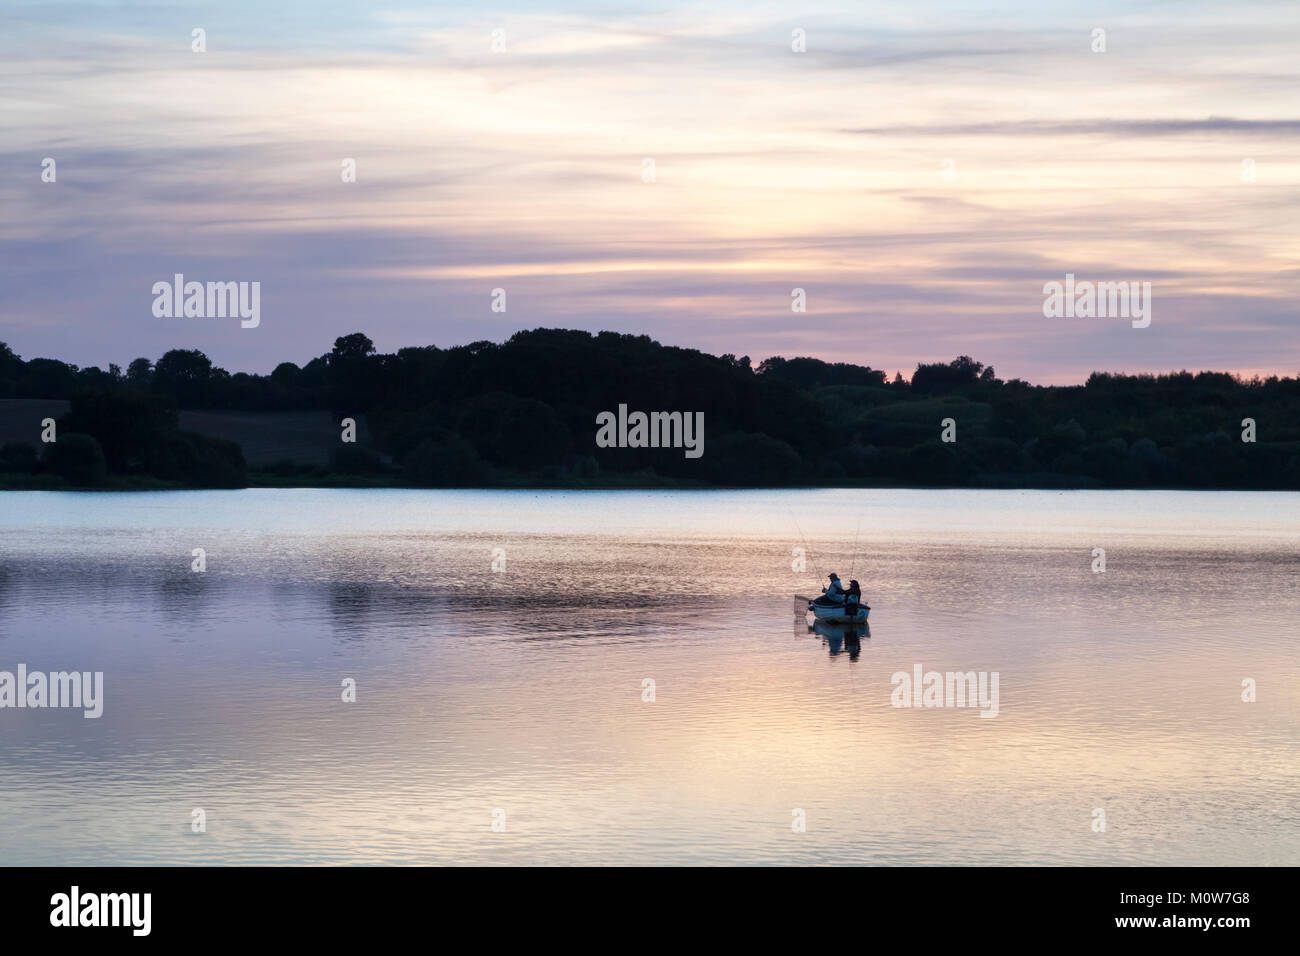 A pair of anglers fishing for Trout from a wooden motor boat on Ravensthorpe reservoir in late September after sunset, Northamptonshire, England. Stock Photo